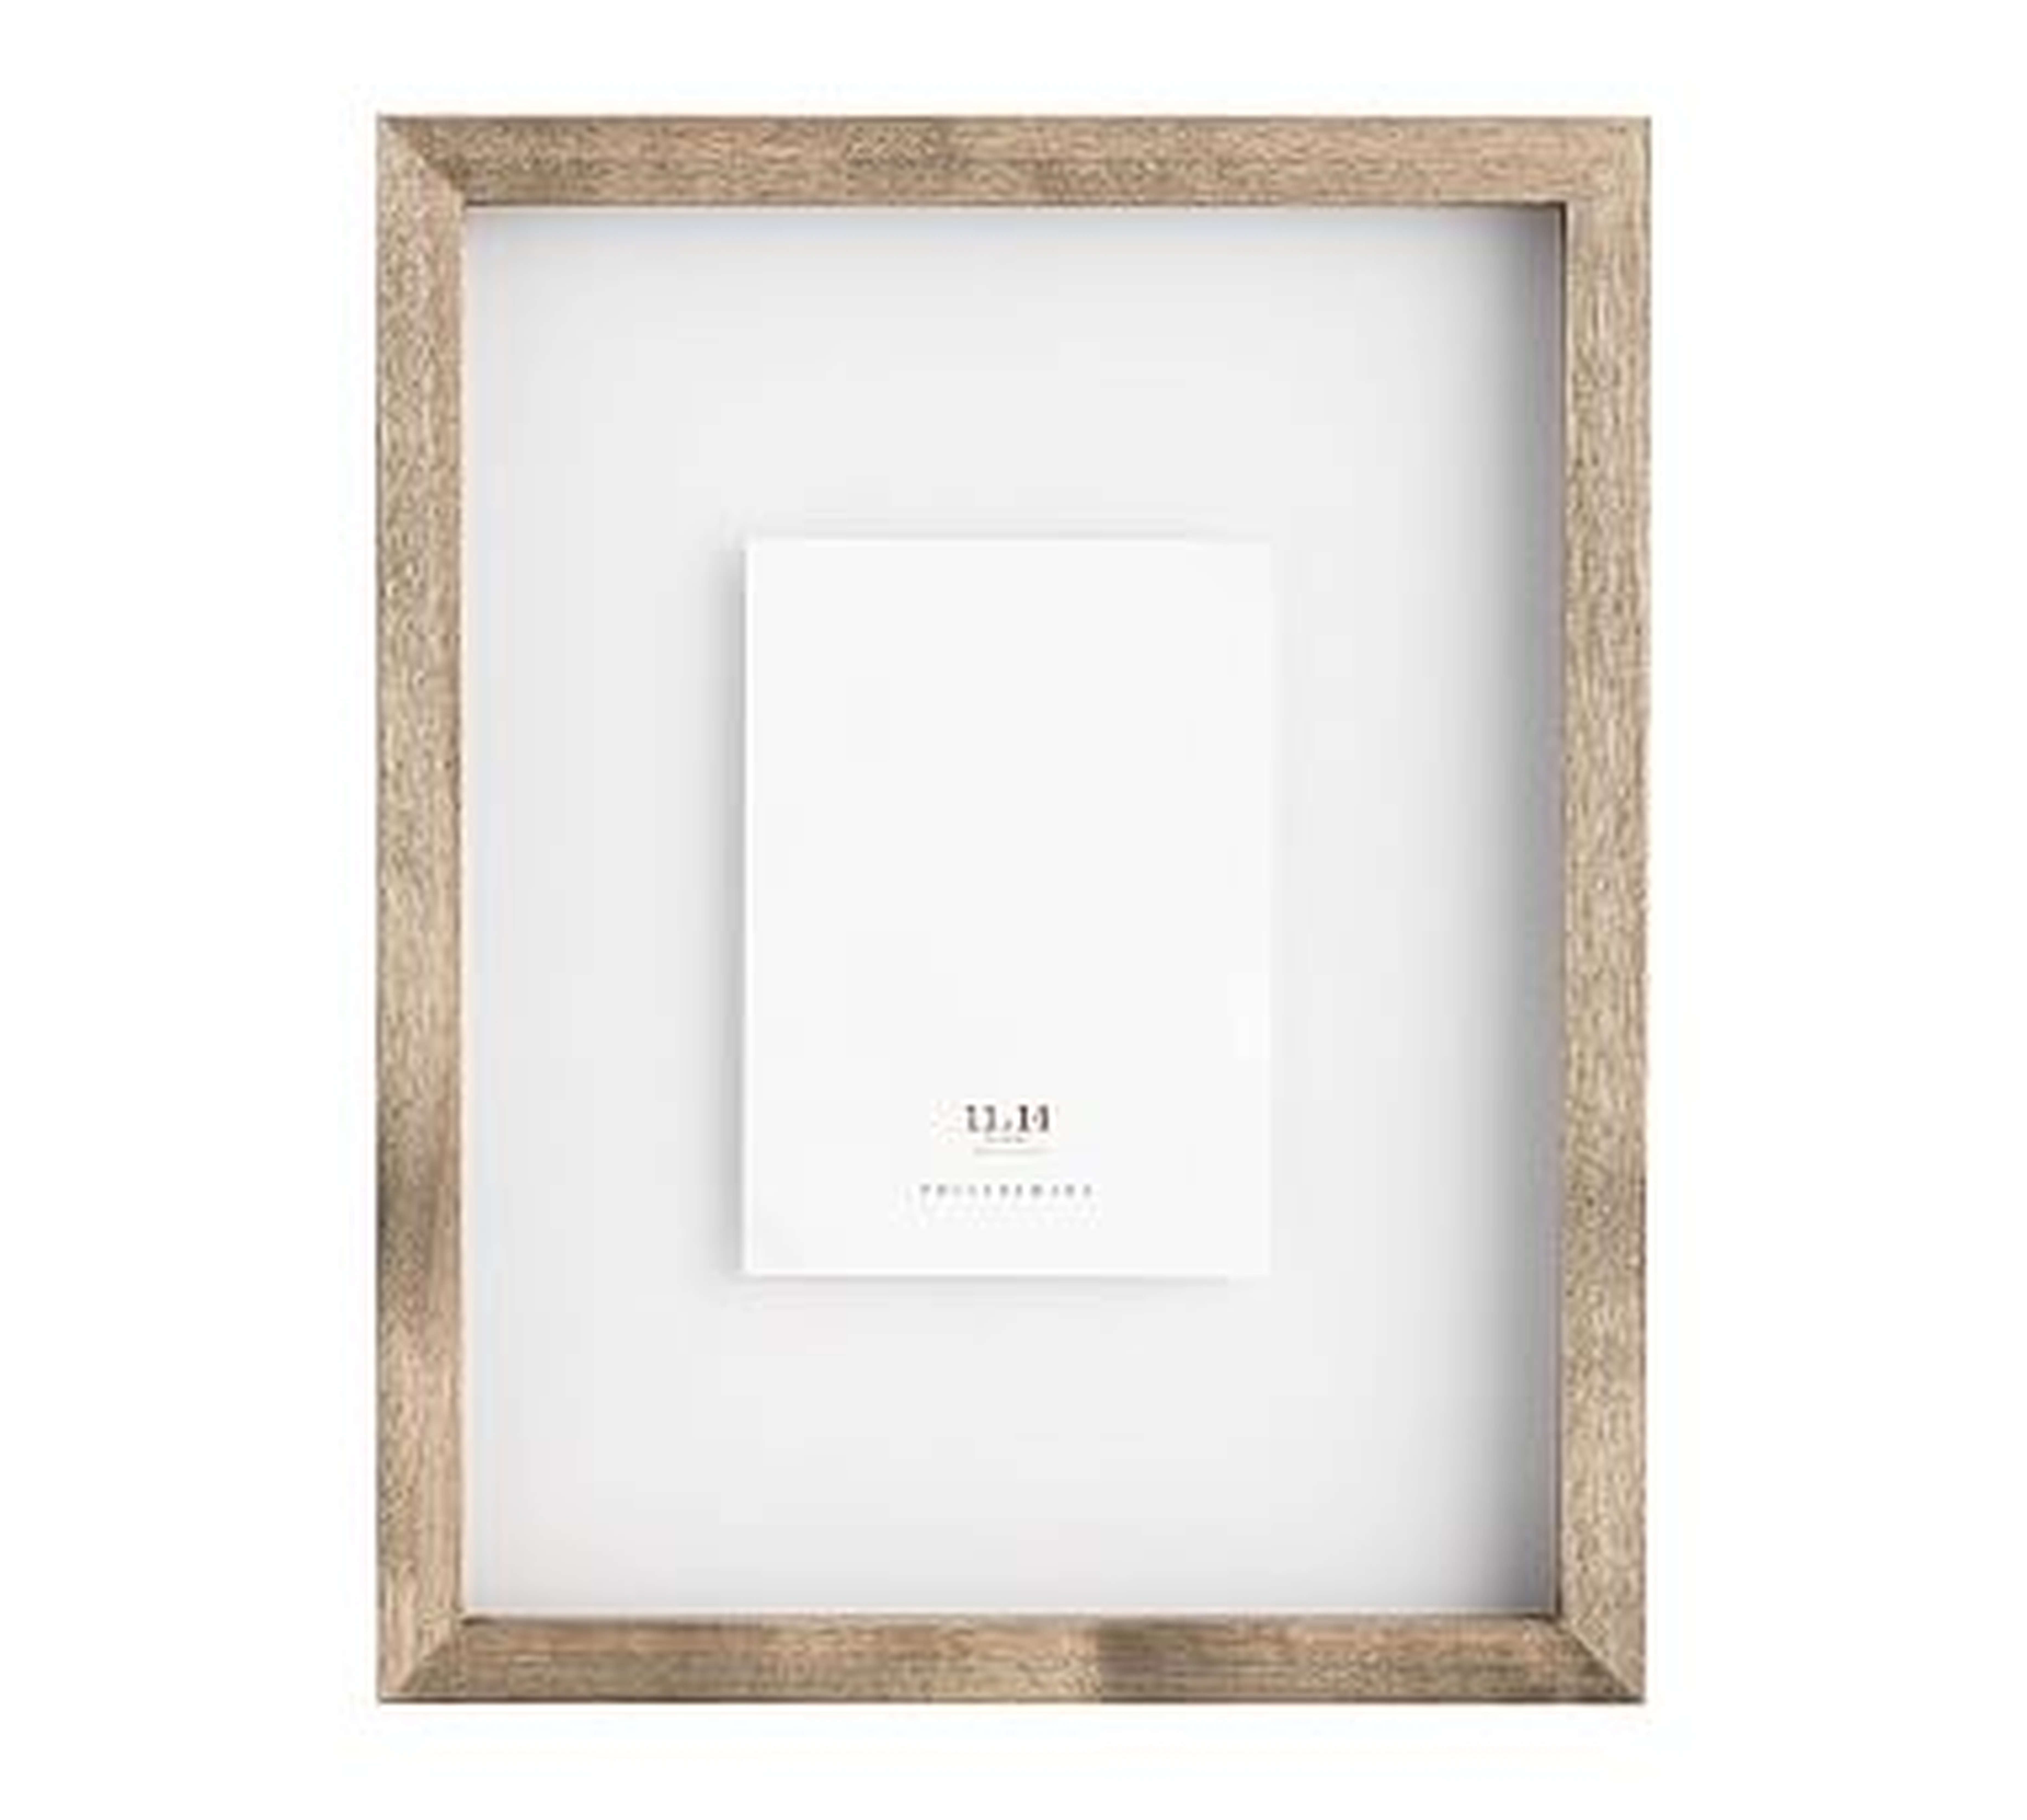 Floating Wood Gallery Frame, 11x14 (12x15 overall) - Graywash - Pottery Barn